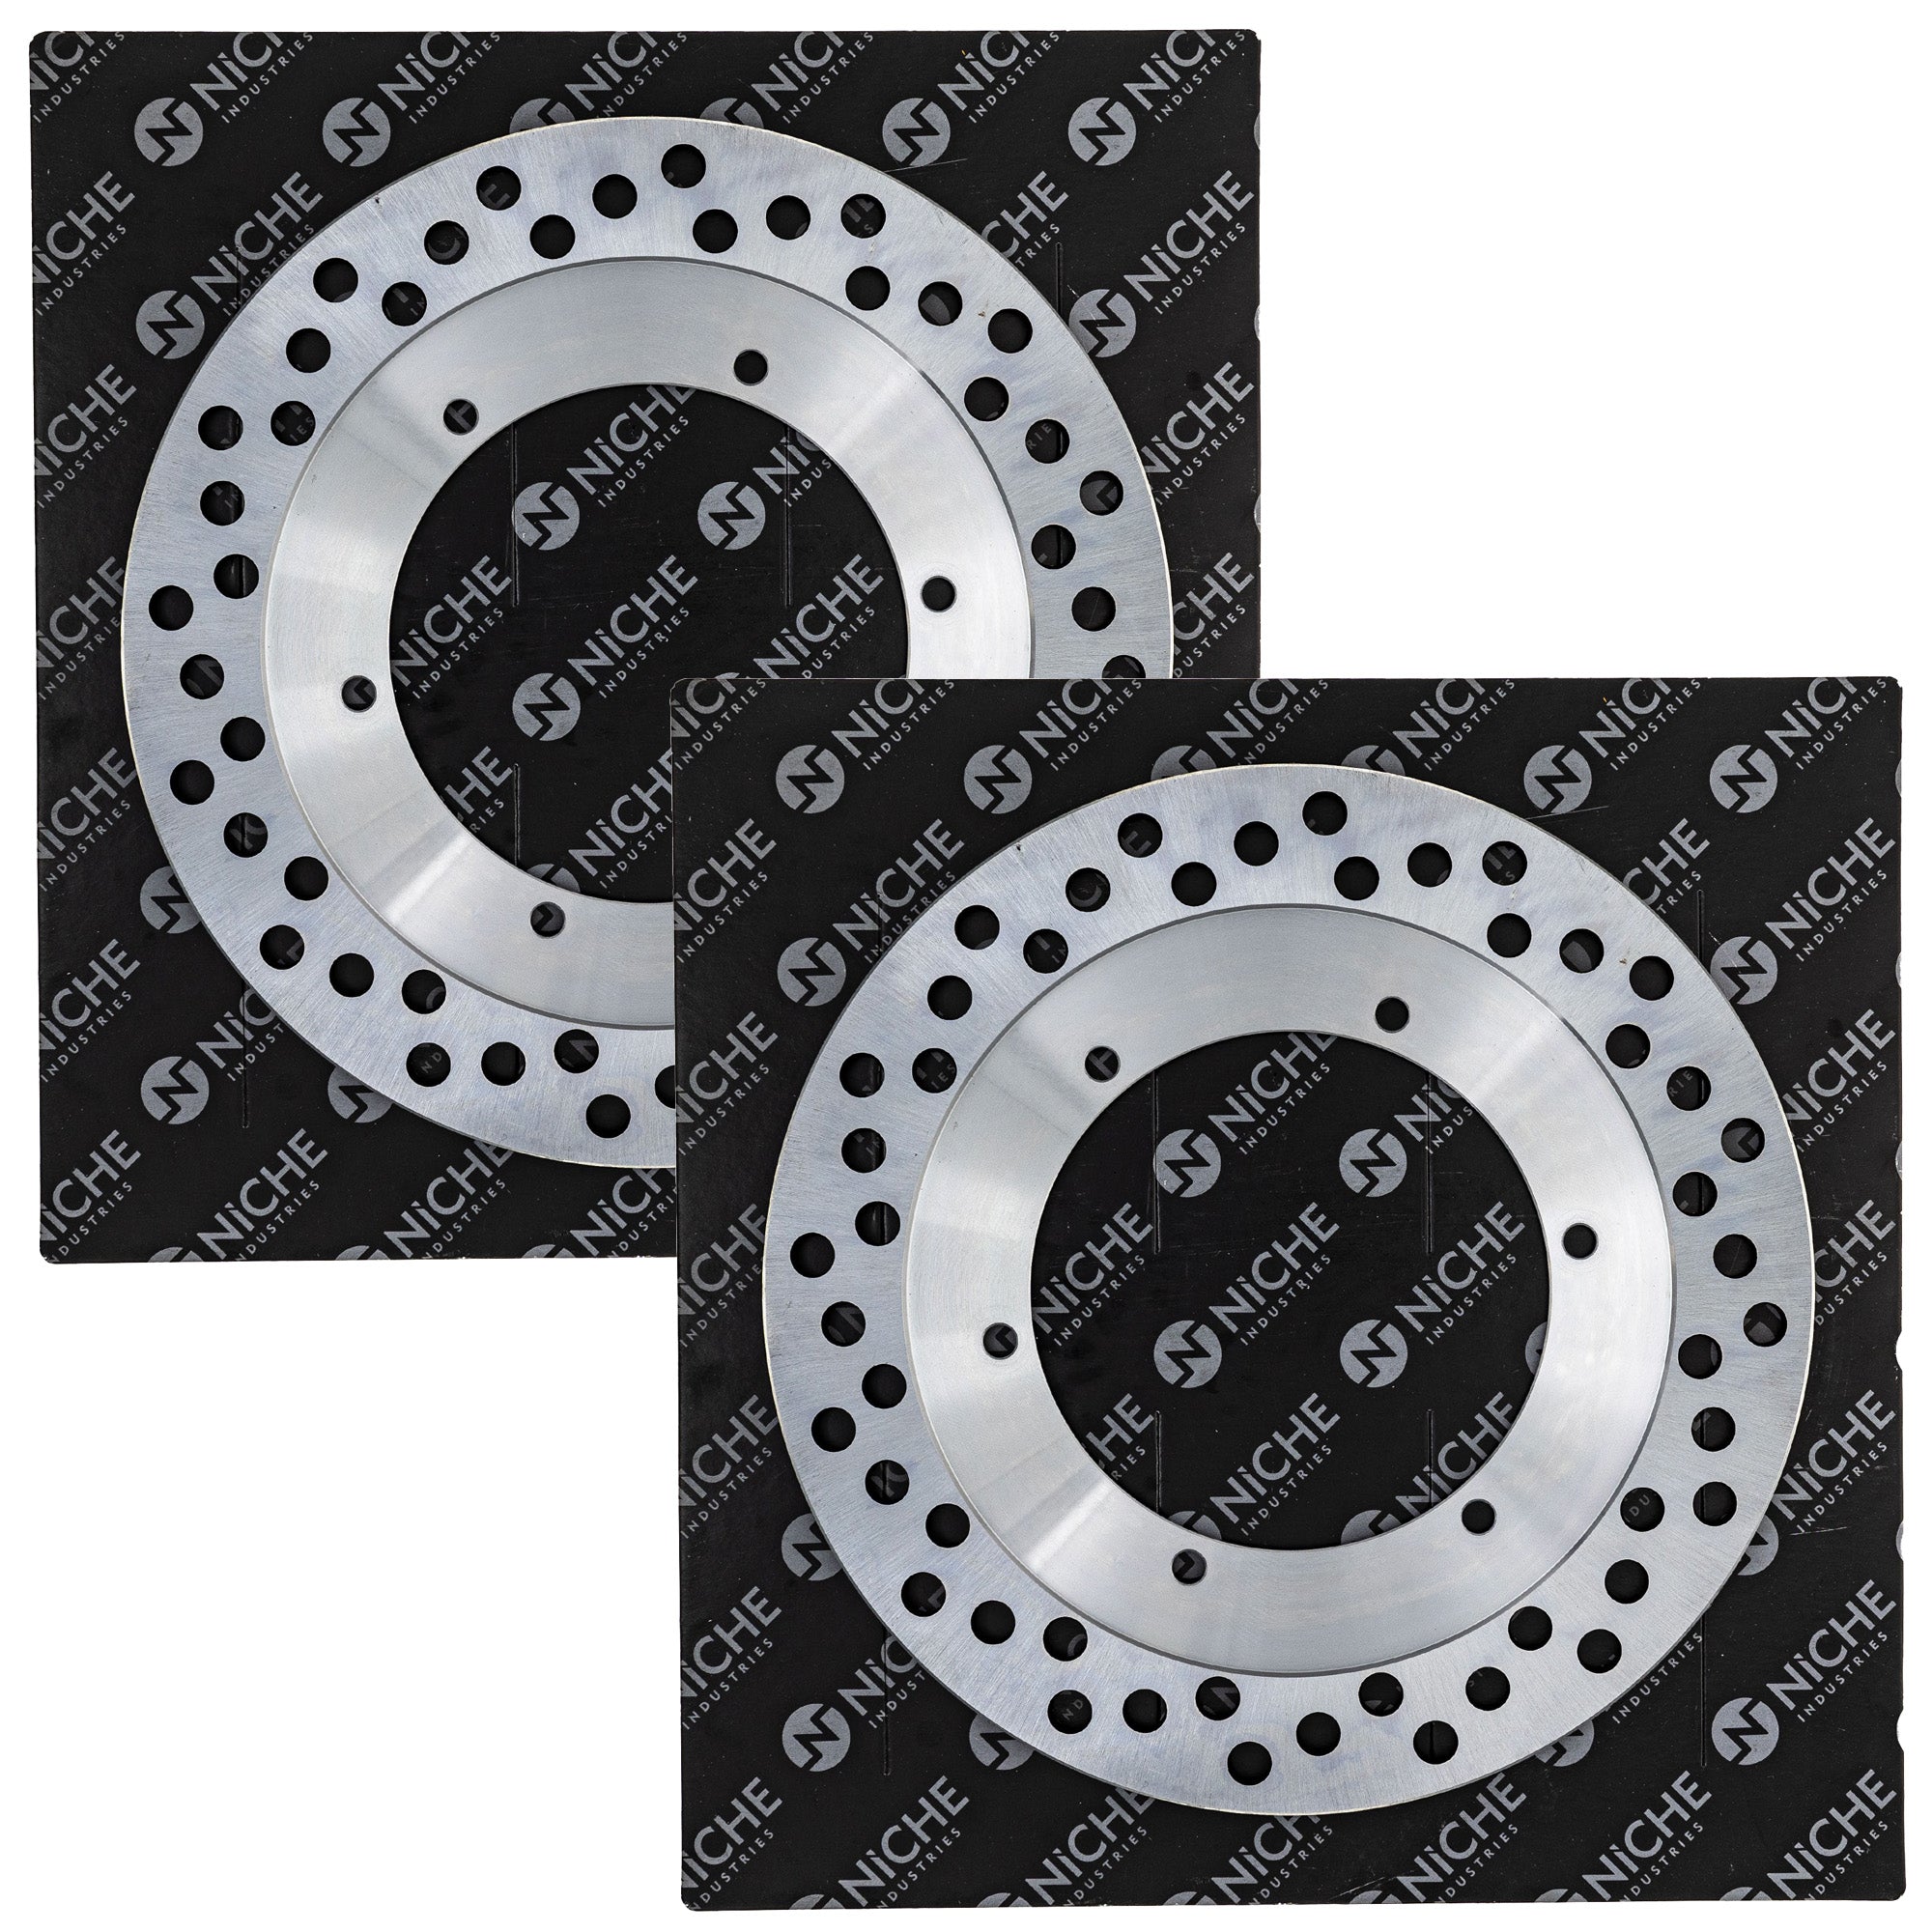 NICHE 519-CRT2508R Front Brake Rotor 2-Pack for zOTHER Seca FZ750